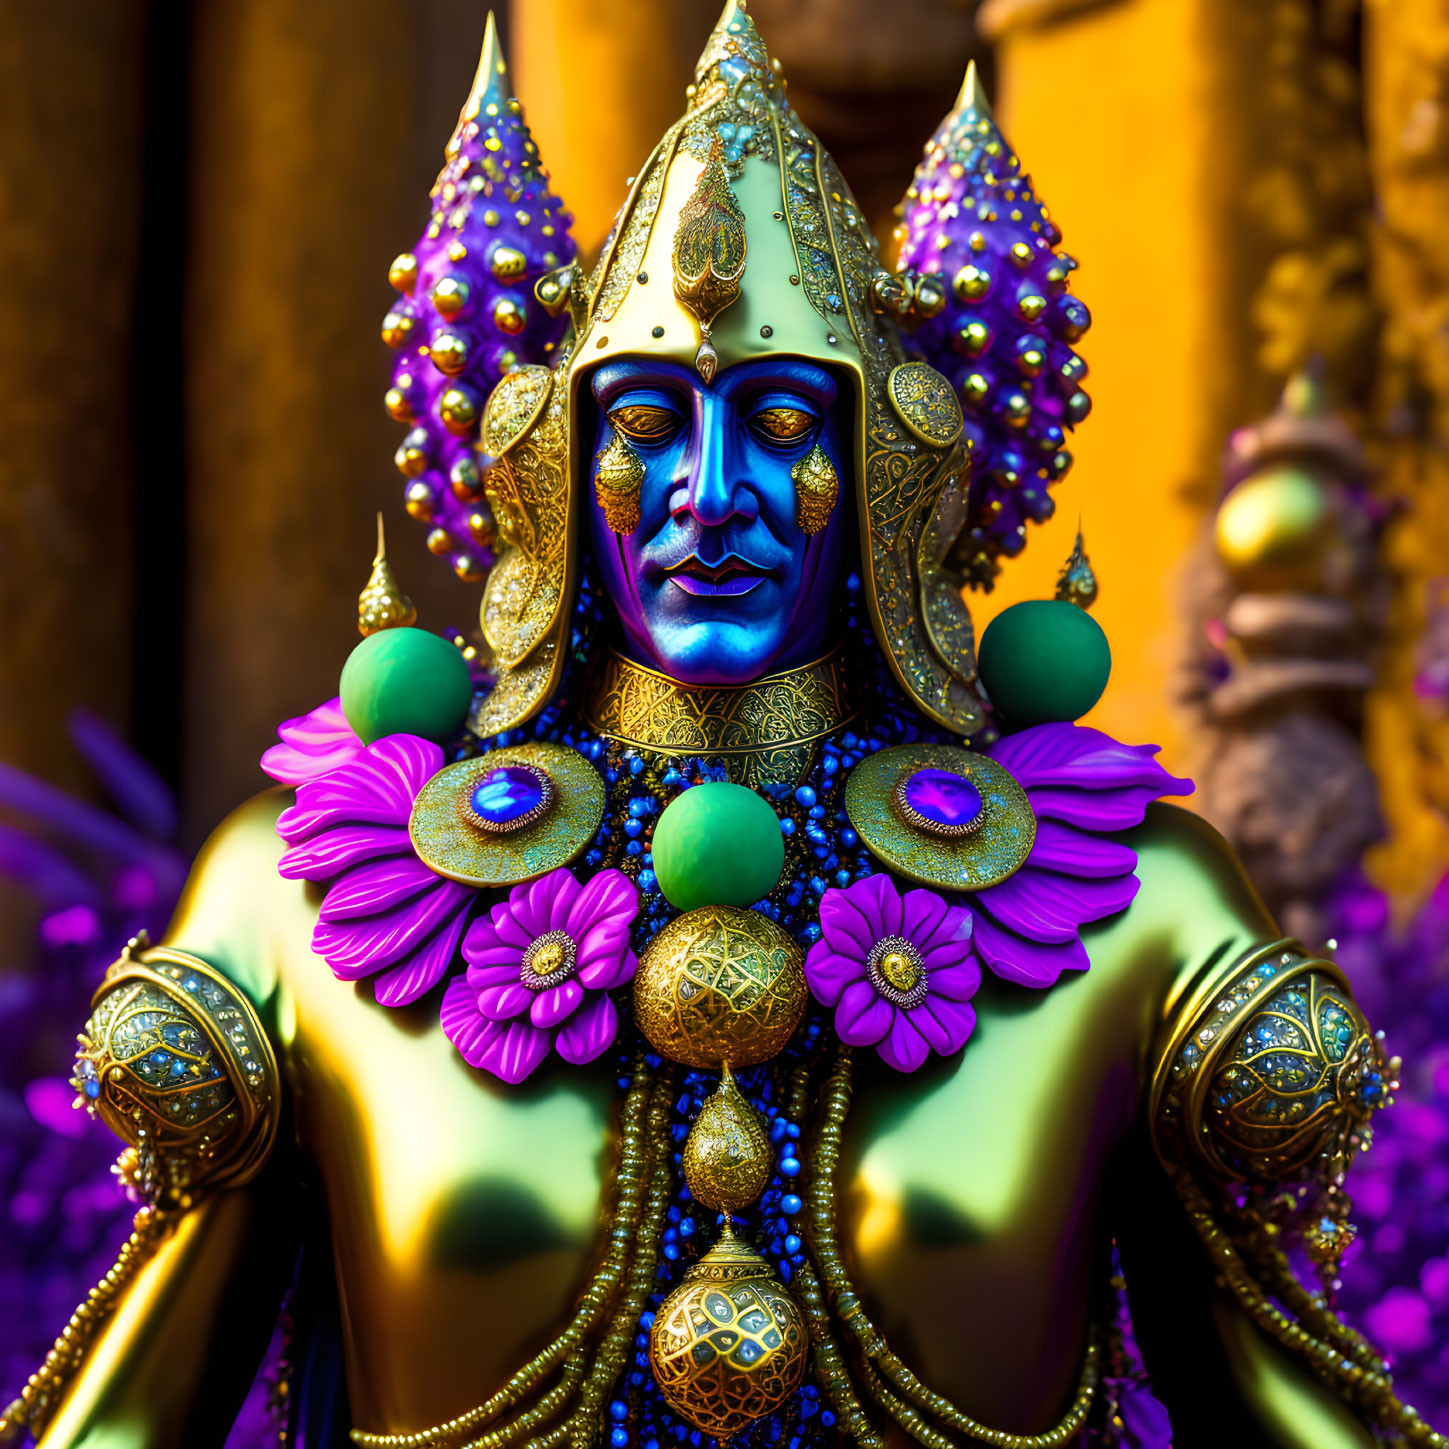 Intricate gold and gemstone details on vibrant statue with blue-faced figure